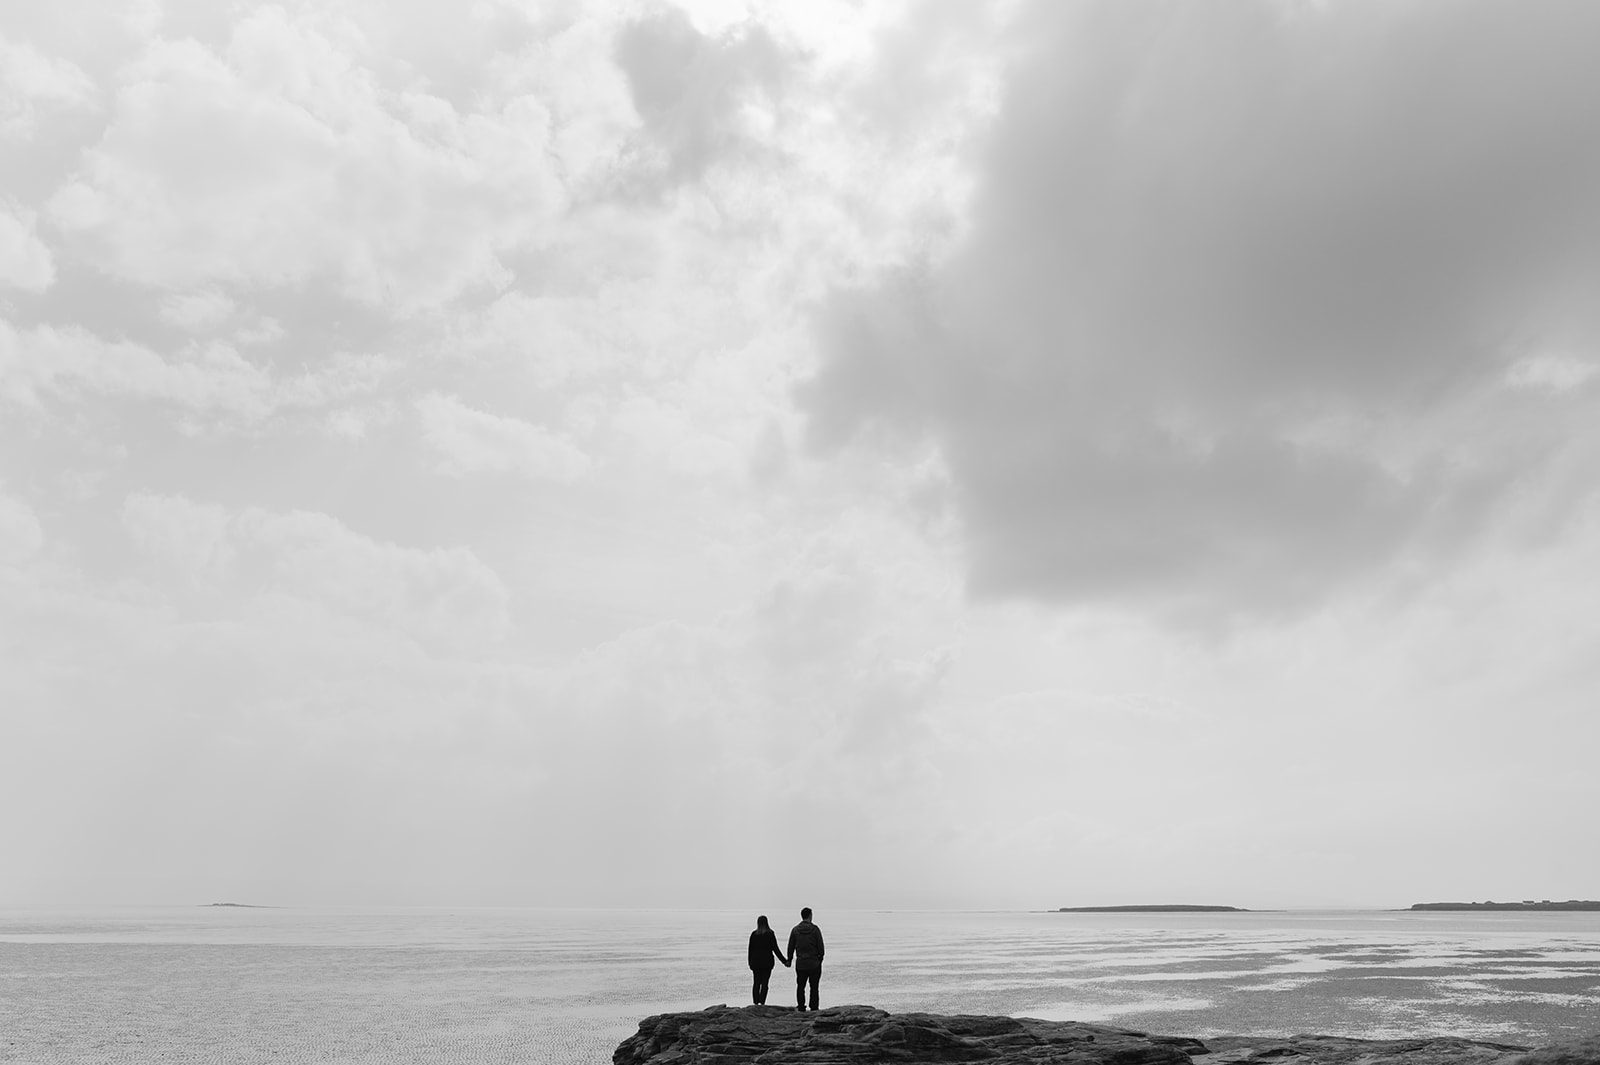 A couple in silhouette in the distance stand holding hands faceing away from the camera looking out to sea